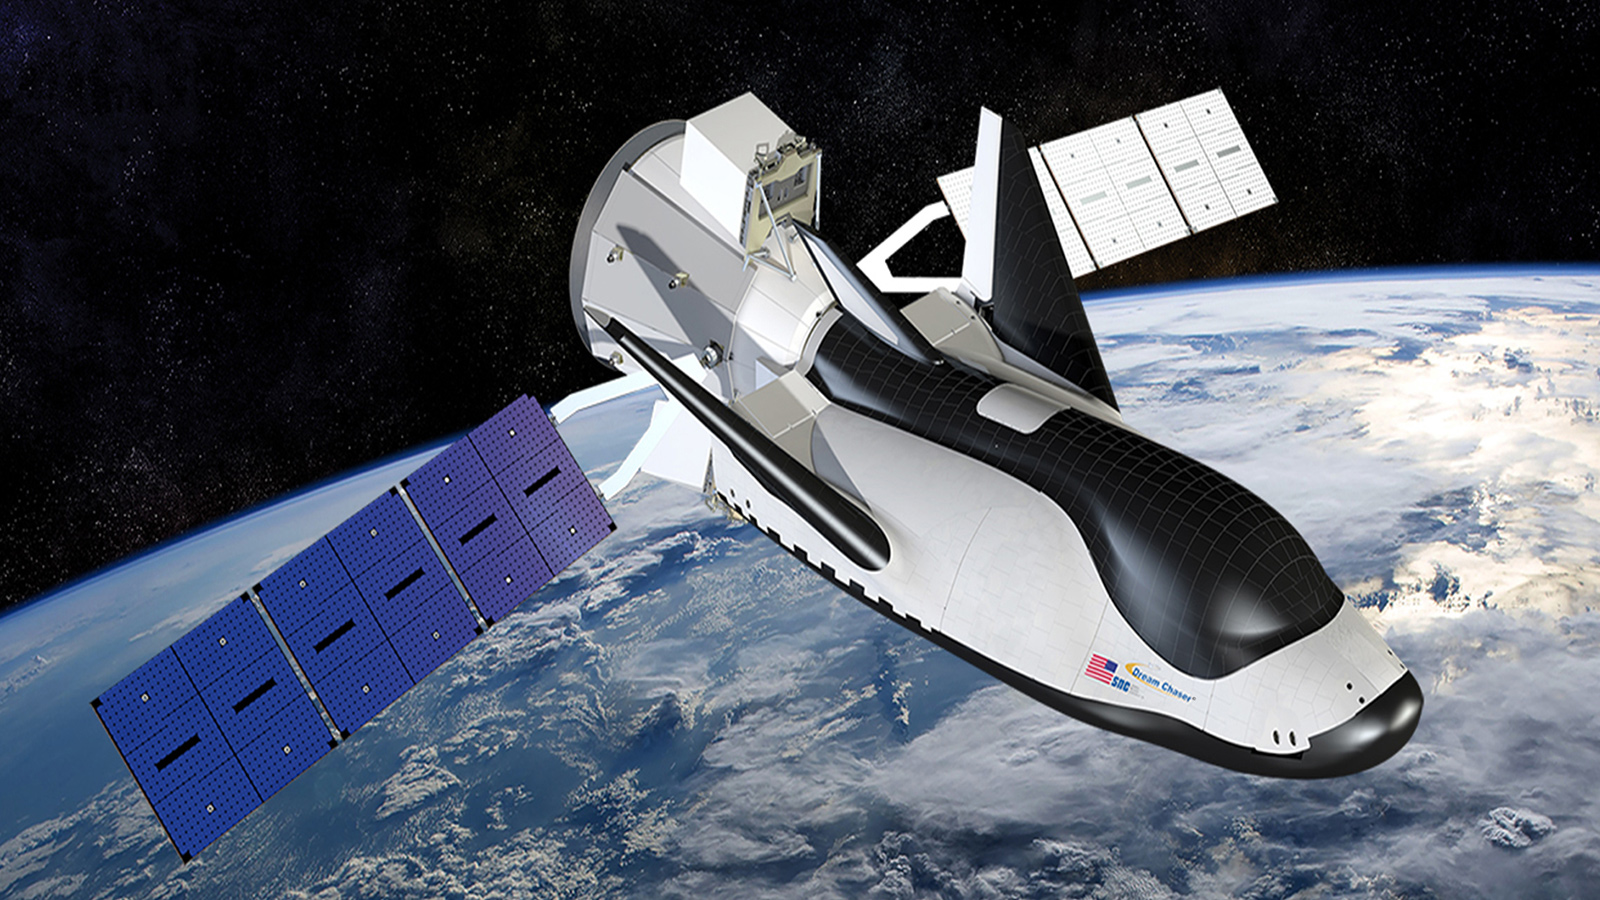 Here’s what’s next for Dream Chaser.